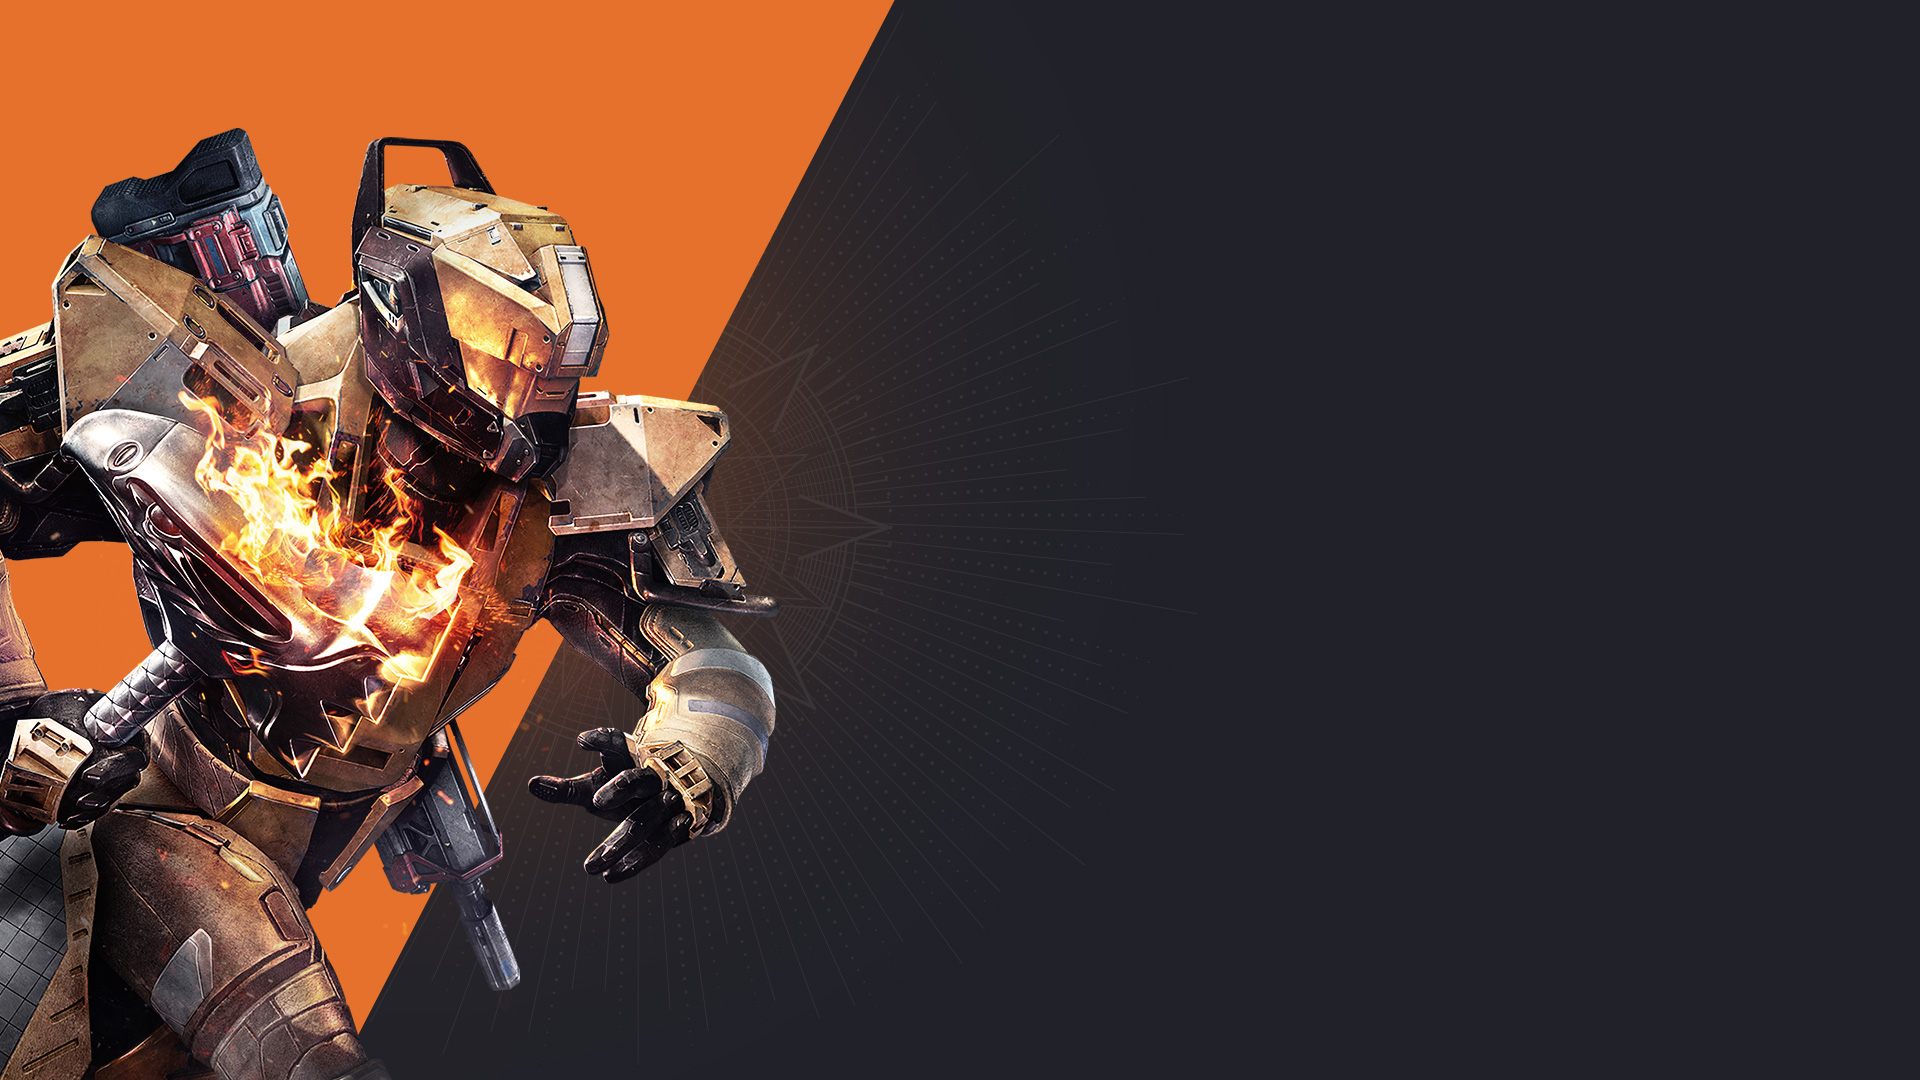 Destiny The Taken King DLC Is Coming September 15 With Exclusive 1920x1080